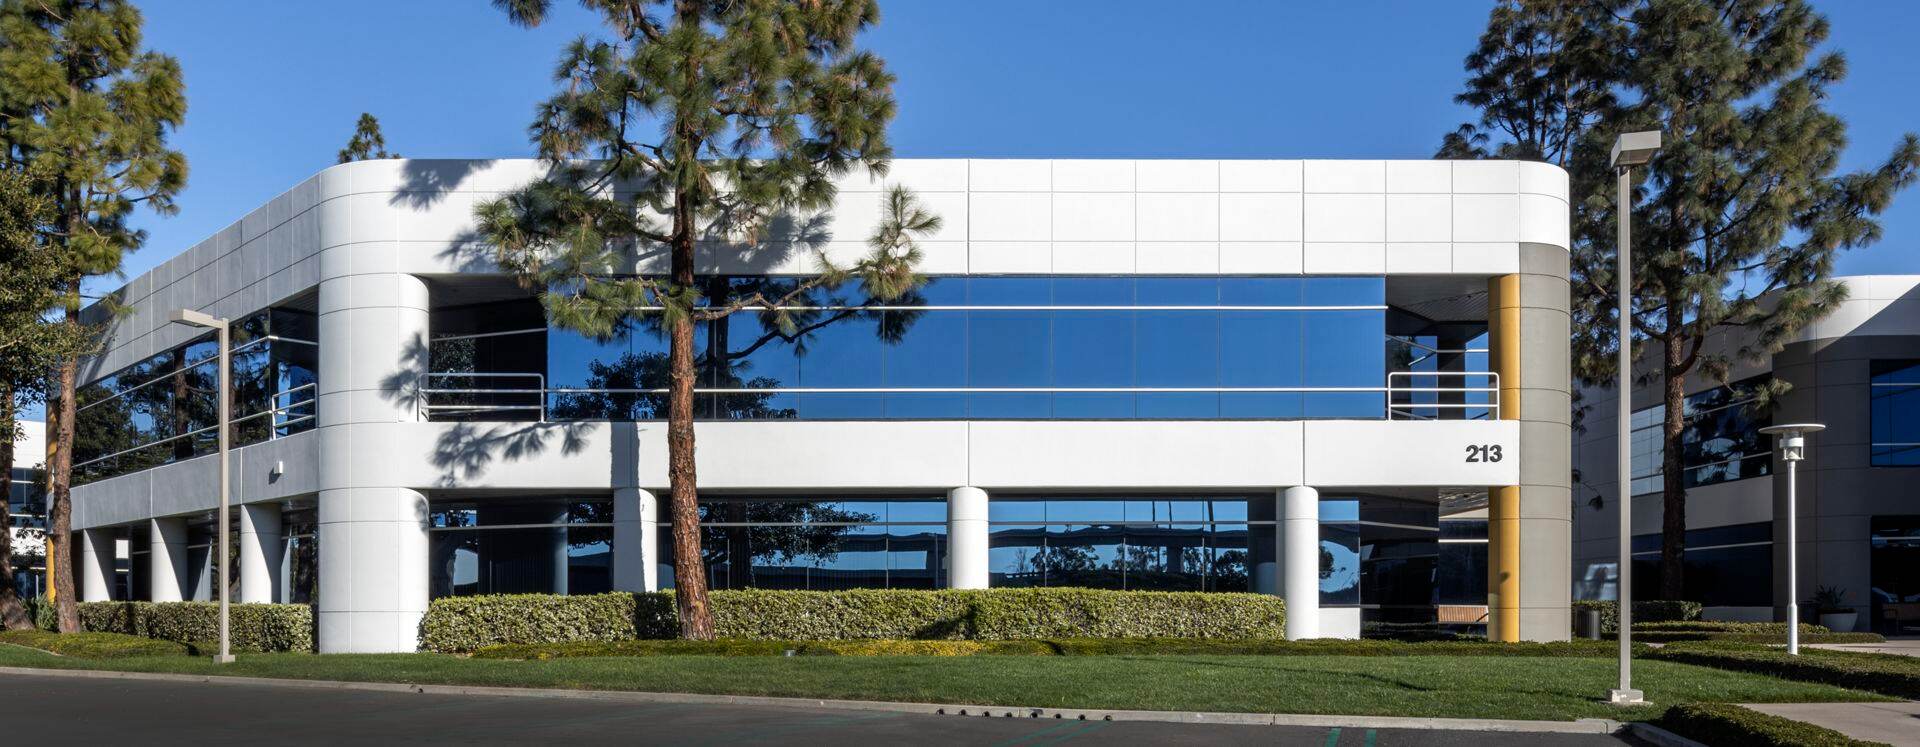 Exterior view of 213 Technology Drive in Irvine, CA.